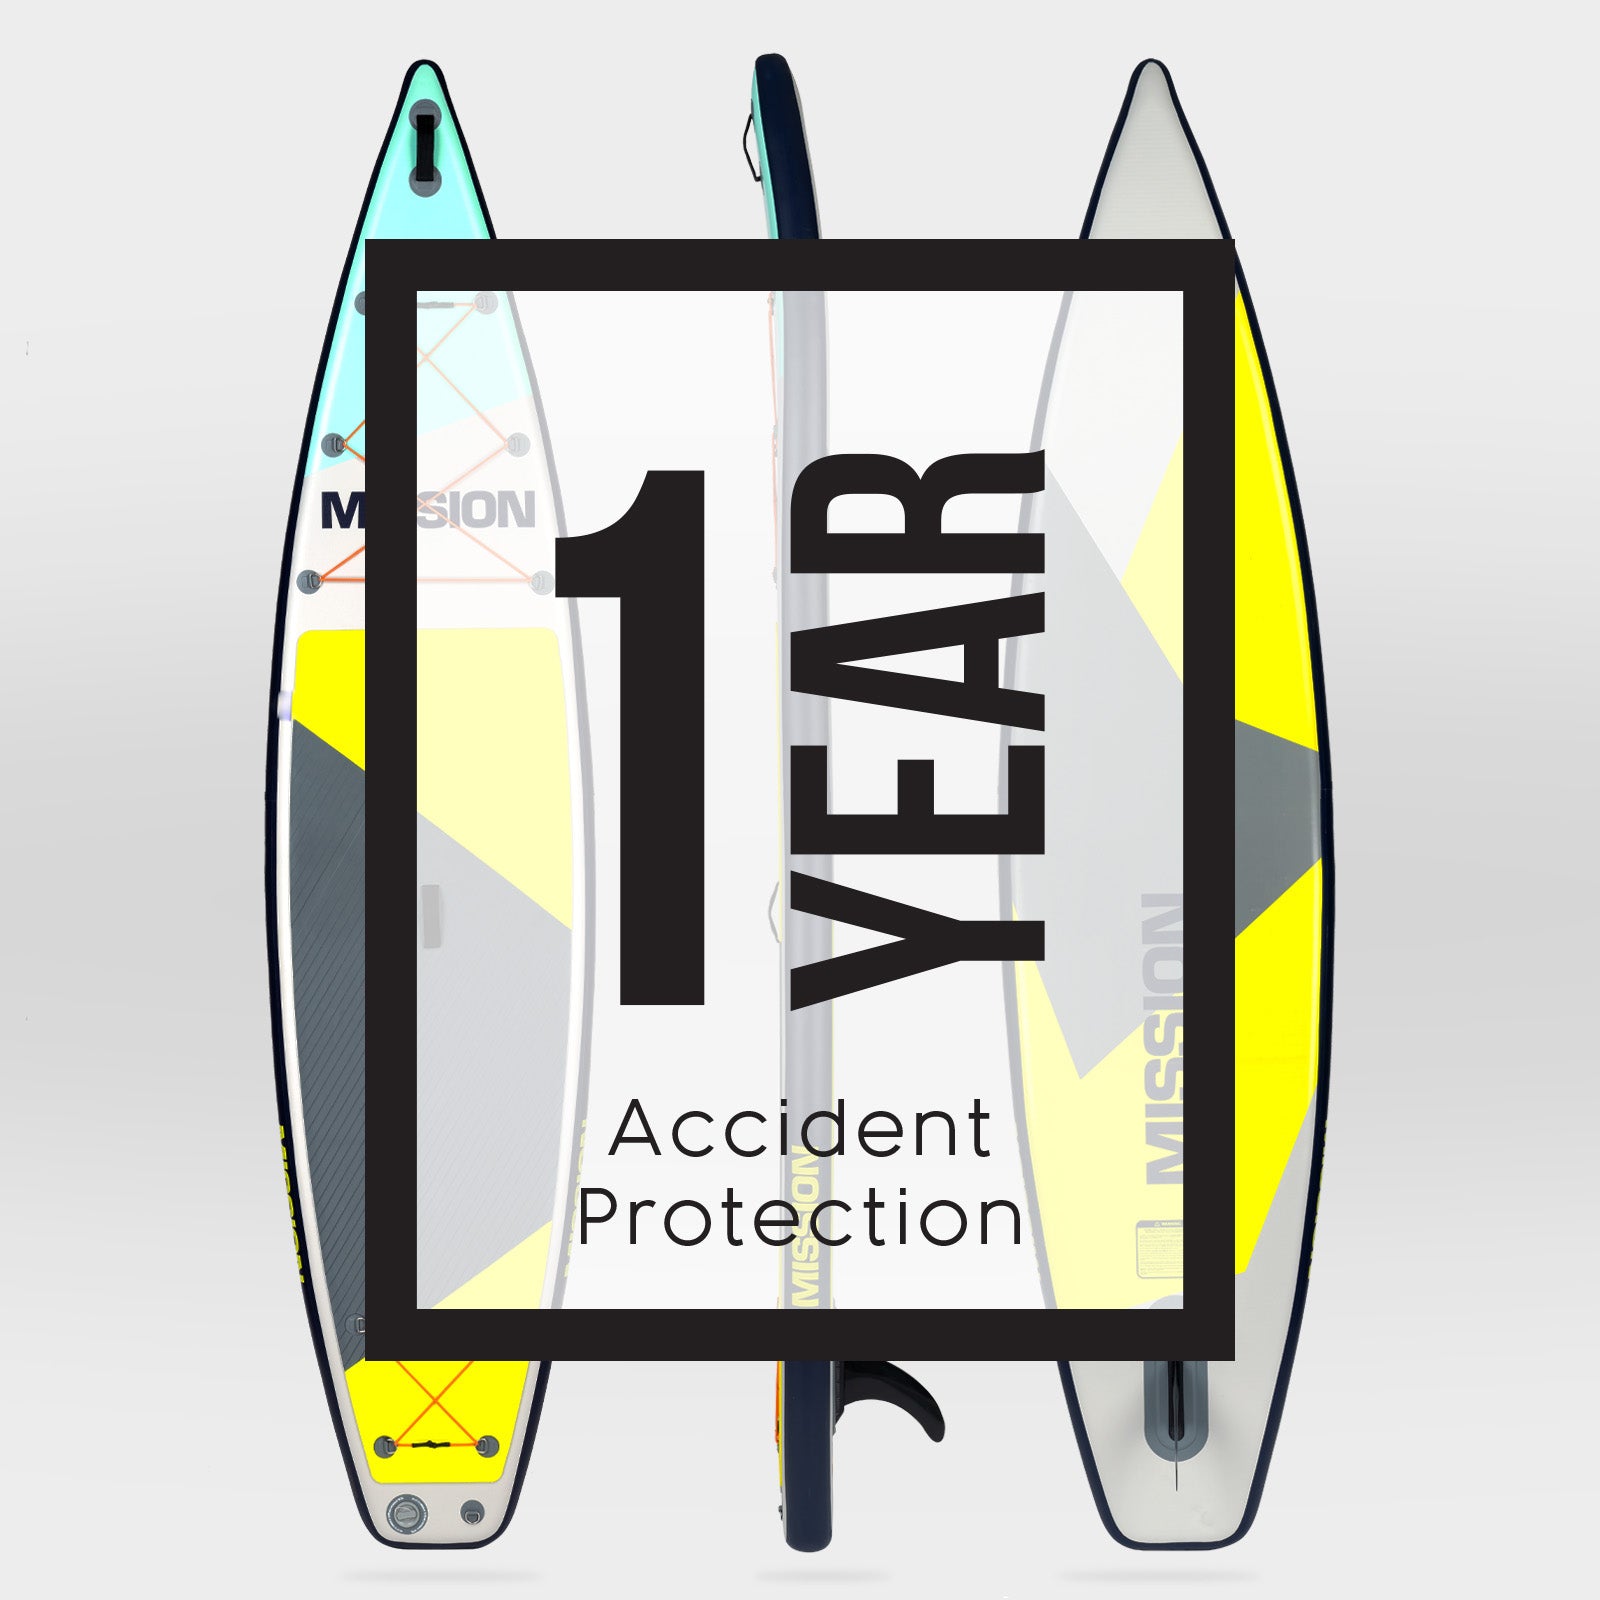 Accident Protection | Inflatable Protection Plans